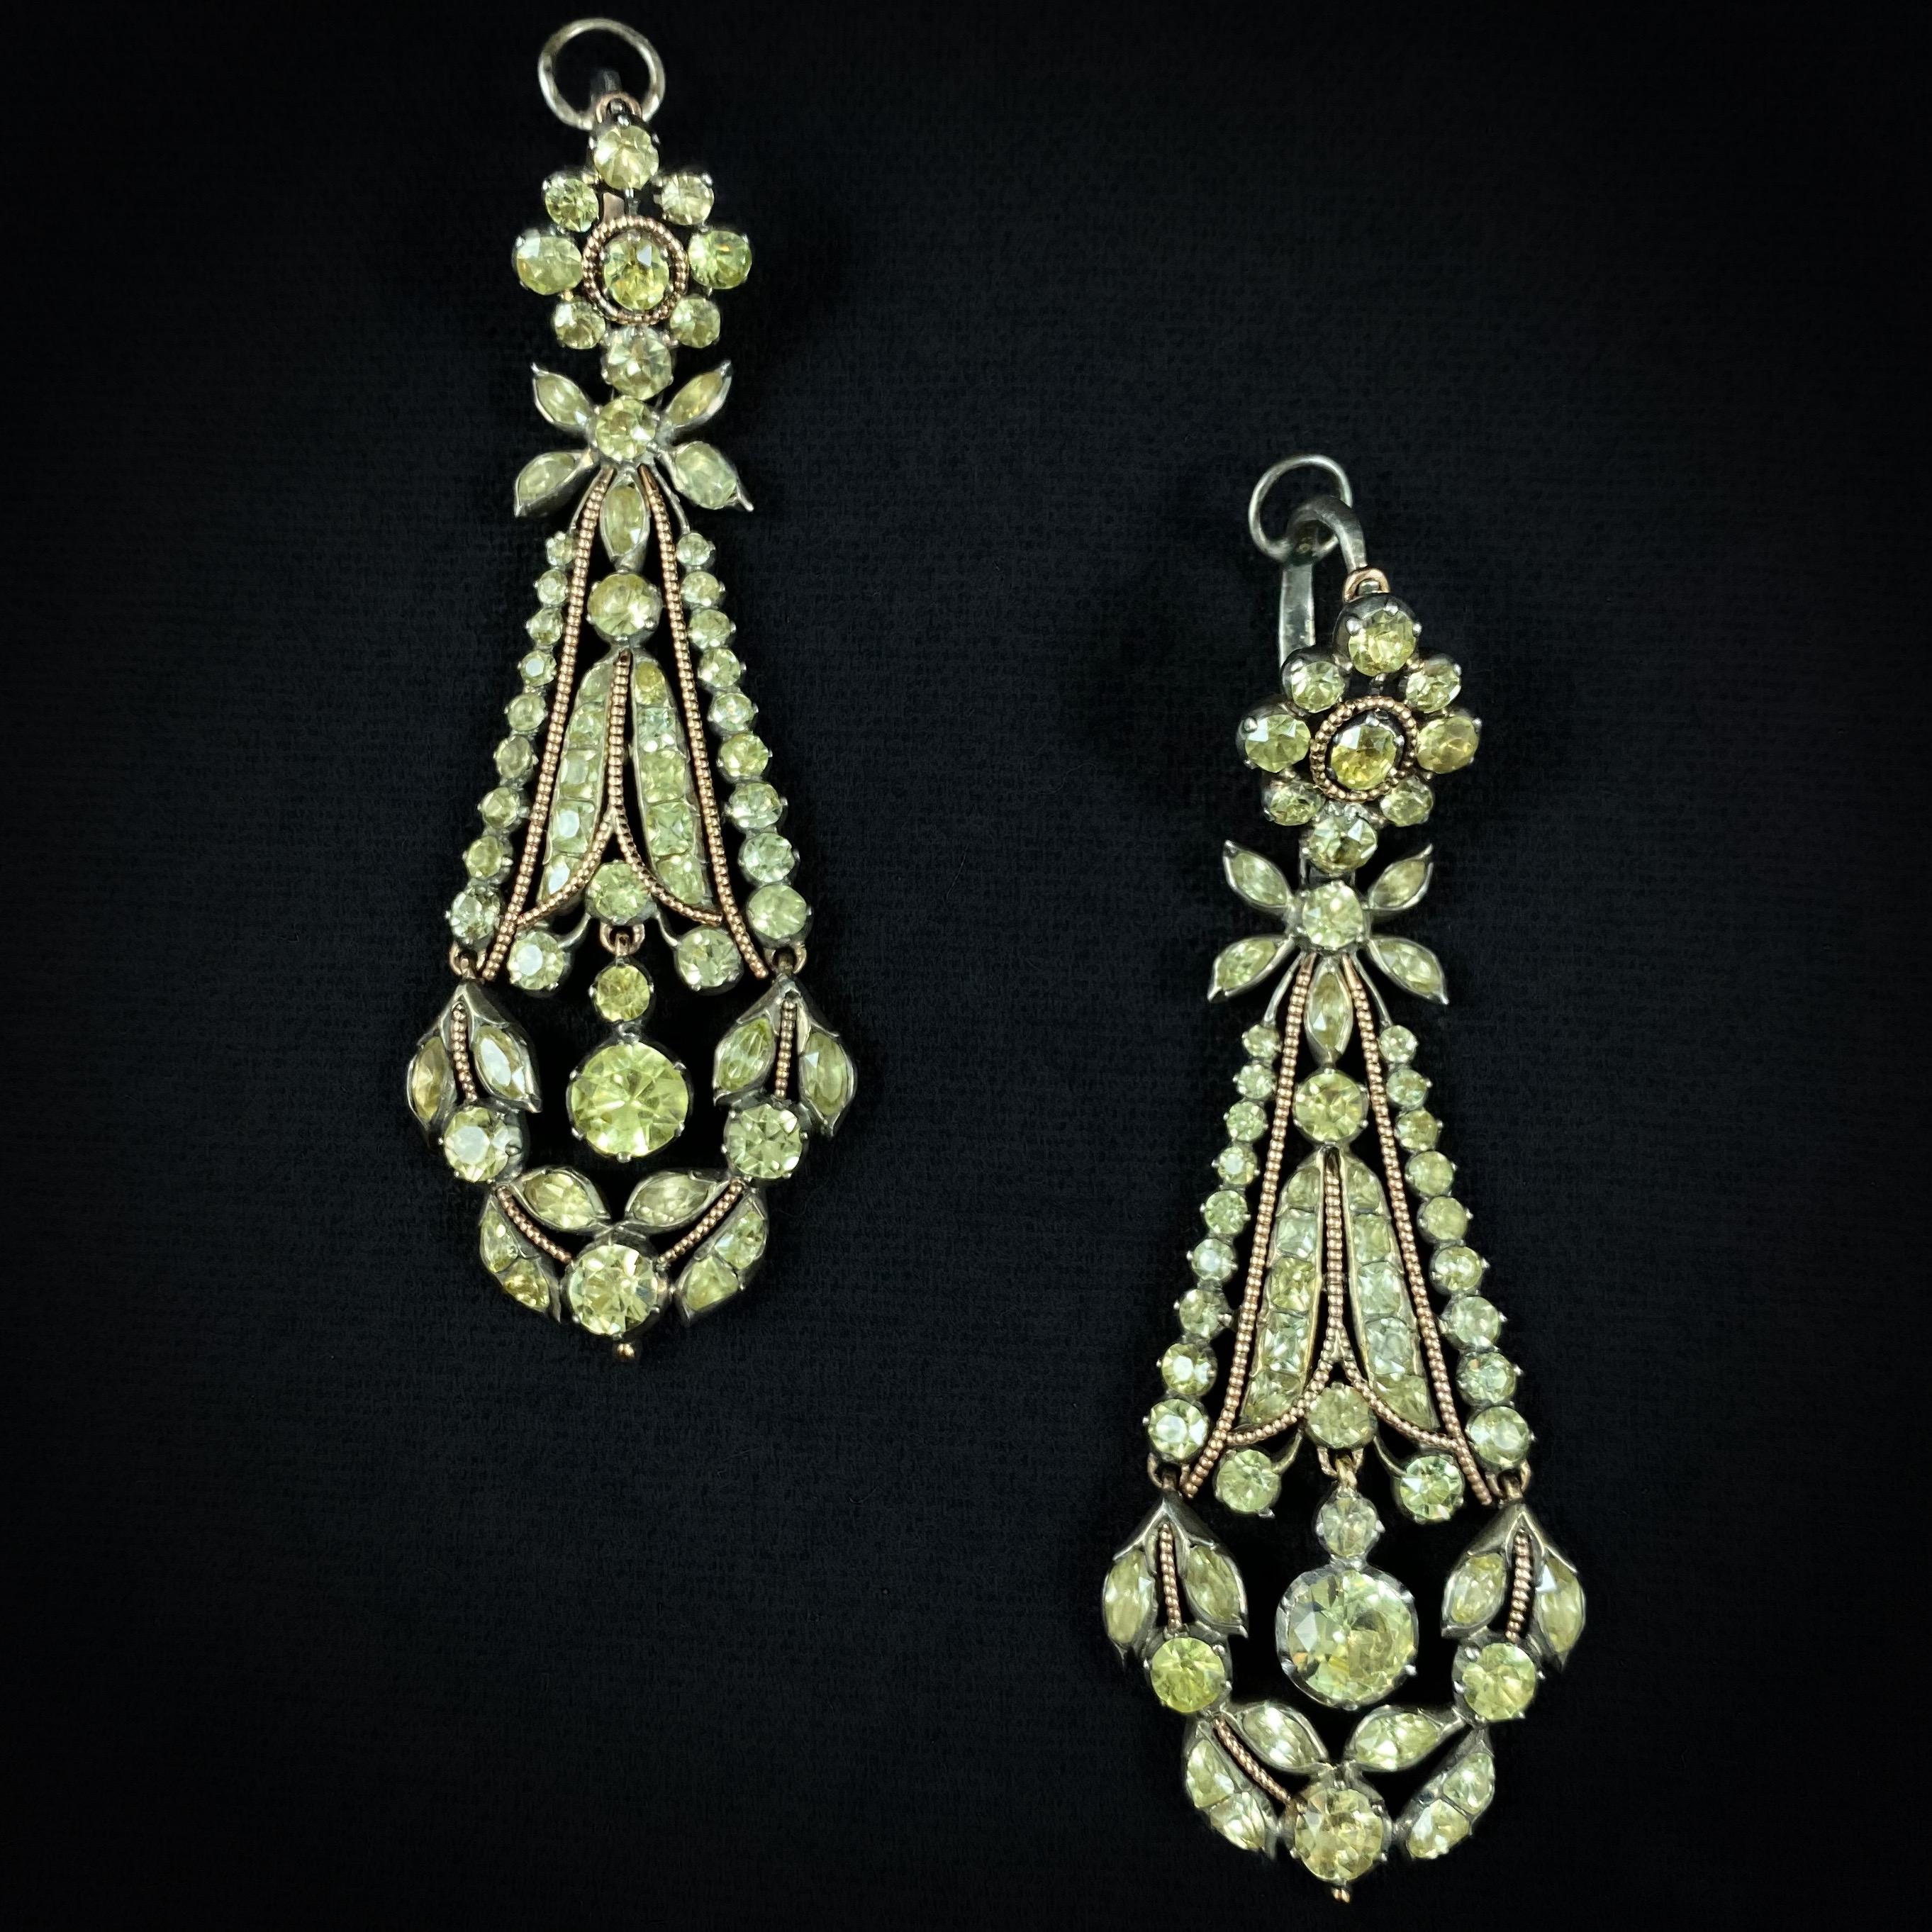 Museum Quality antique late 18th / early 19th century chrysolite chrysoberyl pendant drop earrings in silver and rose gold, probably Portugal, circa 1800. Of elongated and slightly exaggerated outline typical of the period, this design complimented